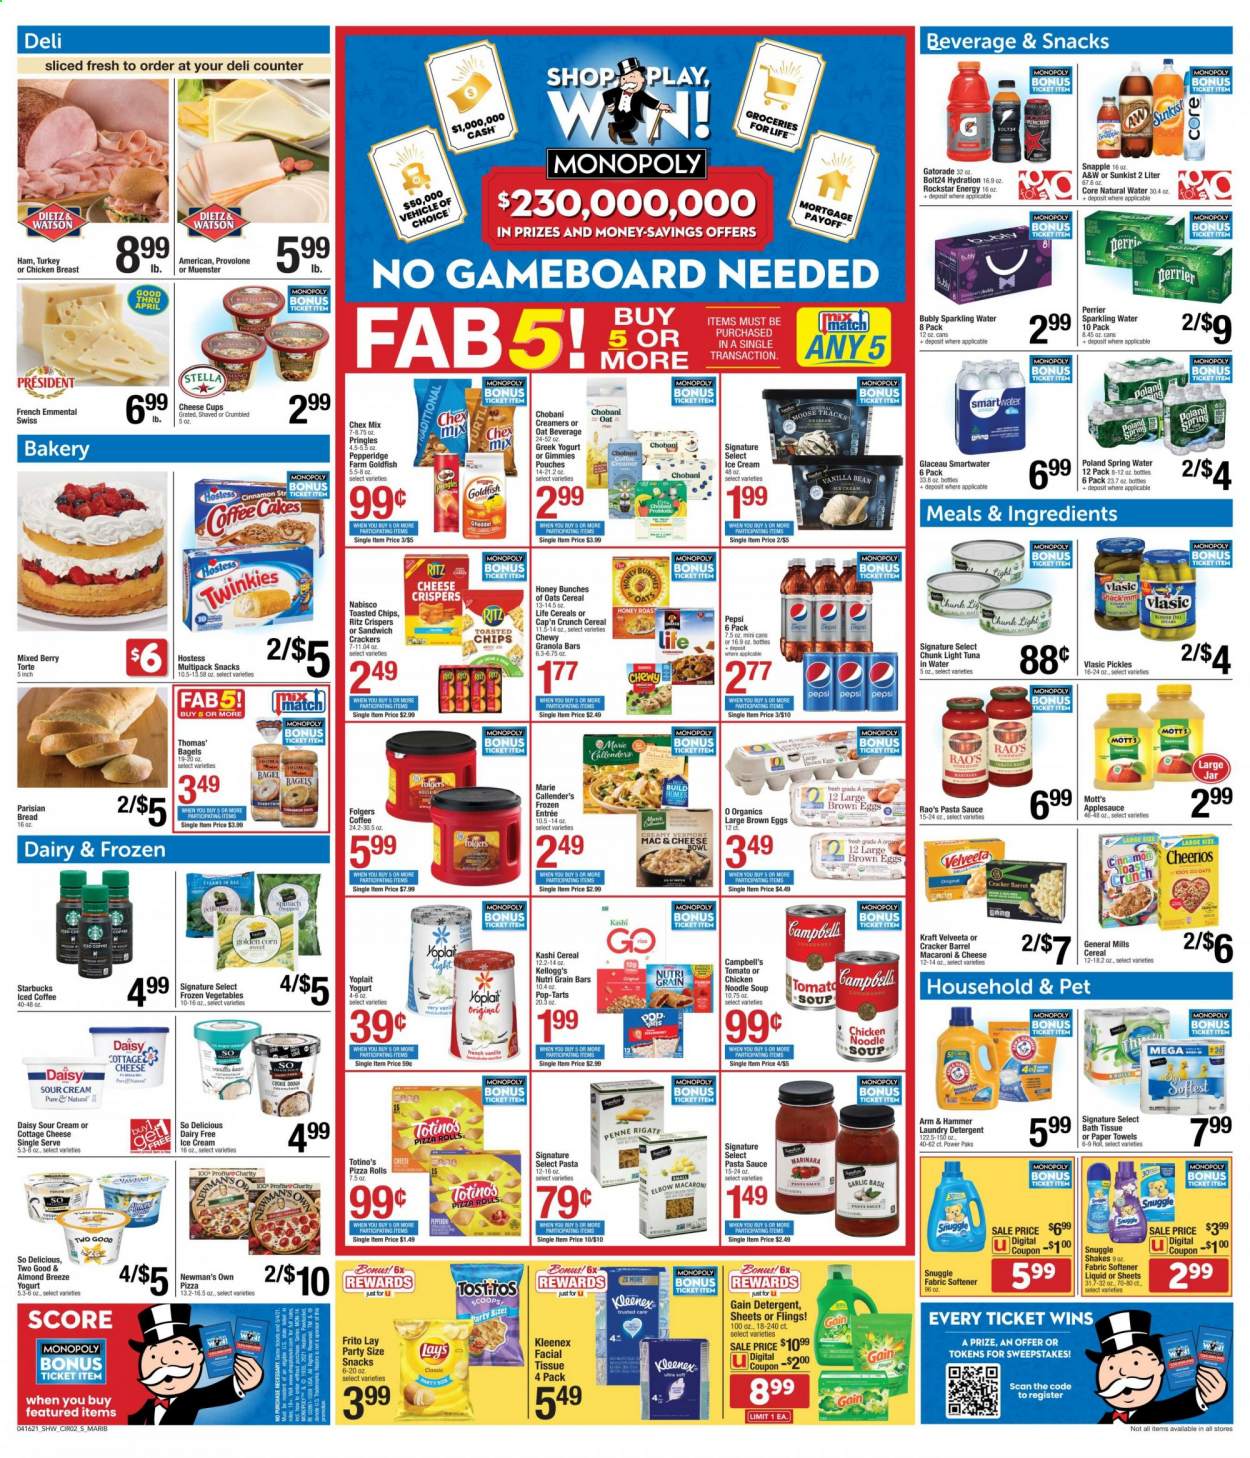 thumbnail - Shaw’s Flyer - 04/16/2021 - 04/22/2021 - Sales products - bagels, cake, pizza rolls, corn, garlic, tuna, Campbell's, macaroni & cheese, pizza, pasta sauce, soup, noodles, Marie Callender's, Kraft®, ham, pepperoni, cottage cheese, swiss cheese, cheese cup, Münster cheese, Président, greek yoghurt, yoghurt, Yoplait, Chobani, Almond Breeze, shake, eggs, sour cream, ice cream, dairy free ice cream, frozen vegetables, cookie dough, snack, crackers, Kellogg's, Pop-Tarts, RITZ, Pringles, Lay’s, Goldfish, Chex Mix, ARM & HAMMER, tuna in water, pickles, light tuna, cereals, Cheerios, granola bar, Cap'n Crunch, Nutri-Grain, penne, esponja, apple sauce, Pepsi, Snapple, A&W, Mott's, Perrier, Rockstar, Gatorade, spring water, sparkling water, iced coffee, Starbucks, Folgers, chicken breasts, bath tissue, Kleenex, kitchen towels, paper towels, detergent, Gain, Snuggle, fabric softener, laundry detergent, cup, bowl, bunches. Page 2.